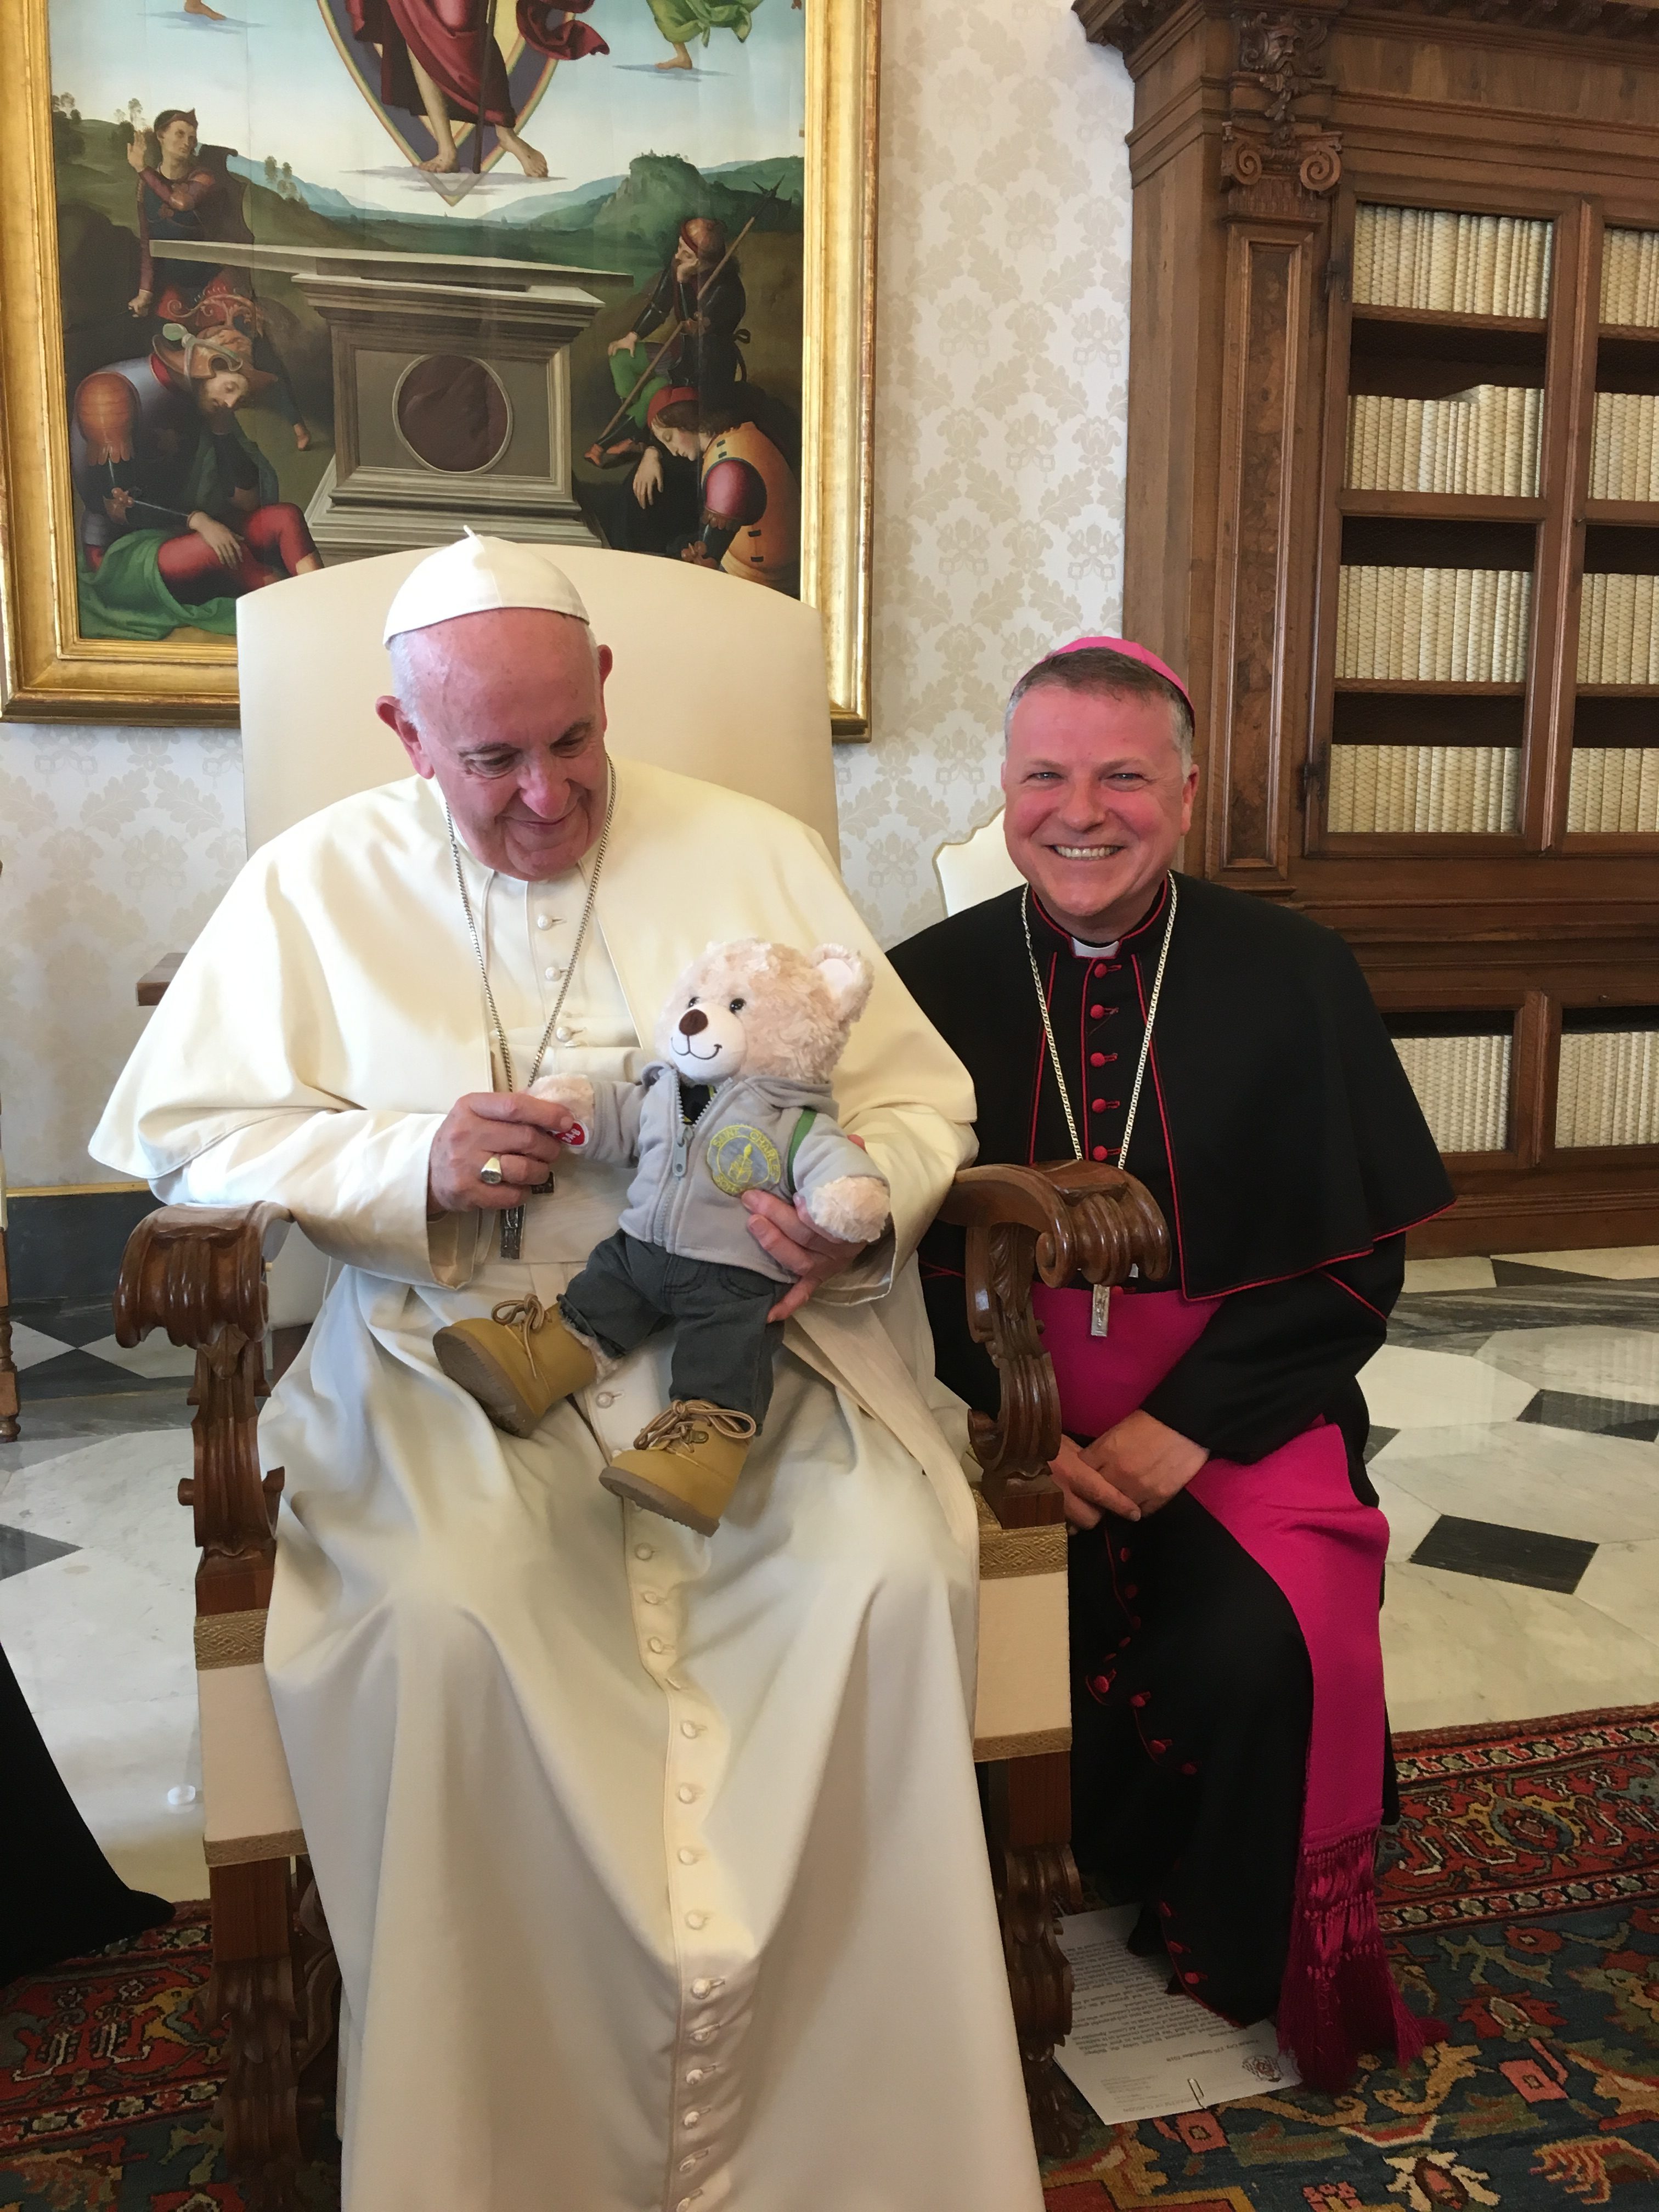 Pope Francis with a teddy bear and Bishop John Keenan